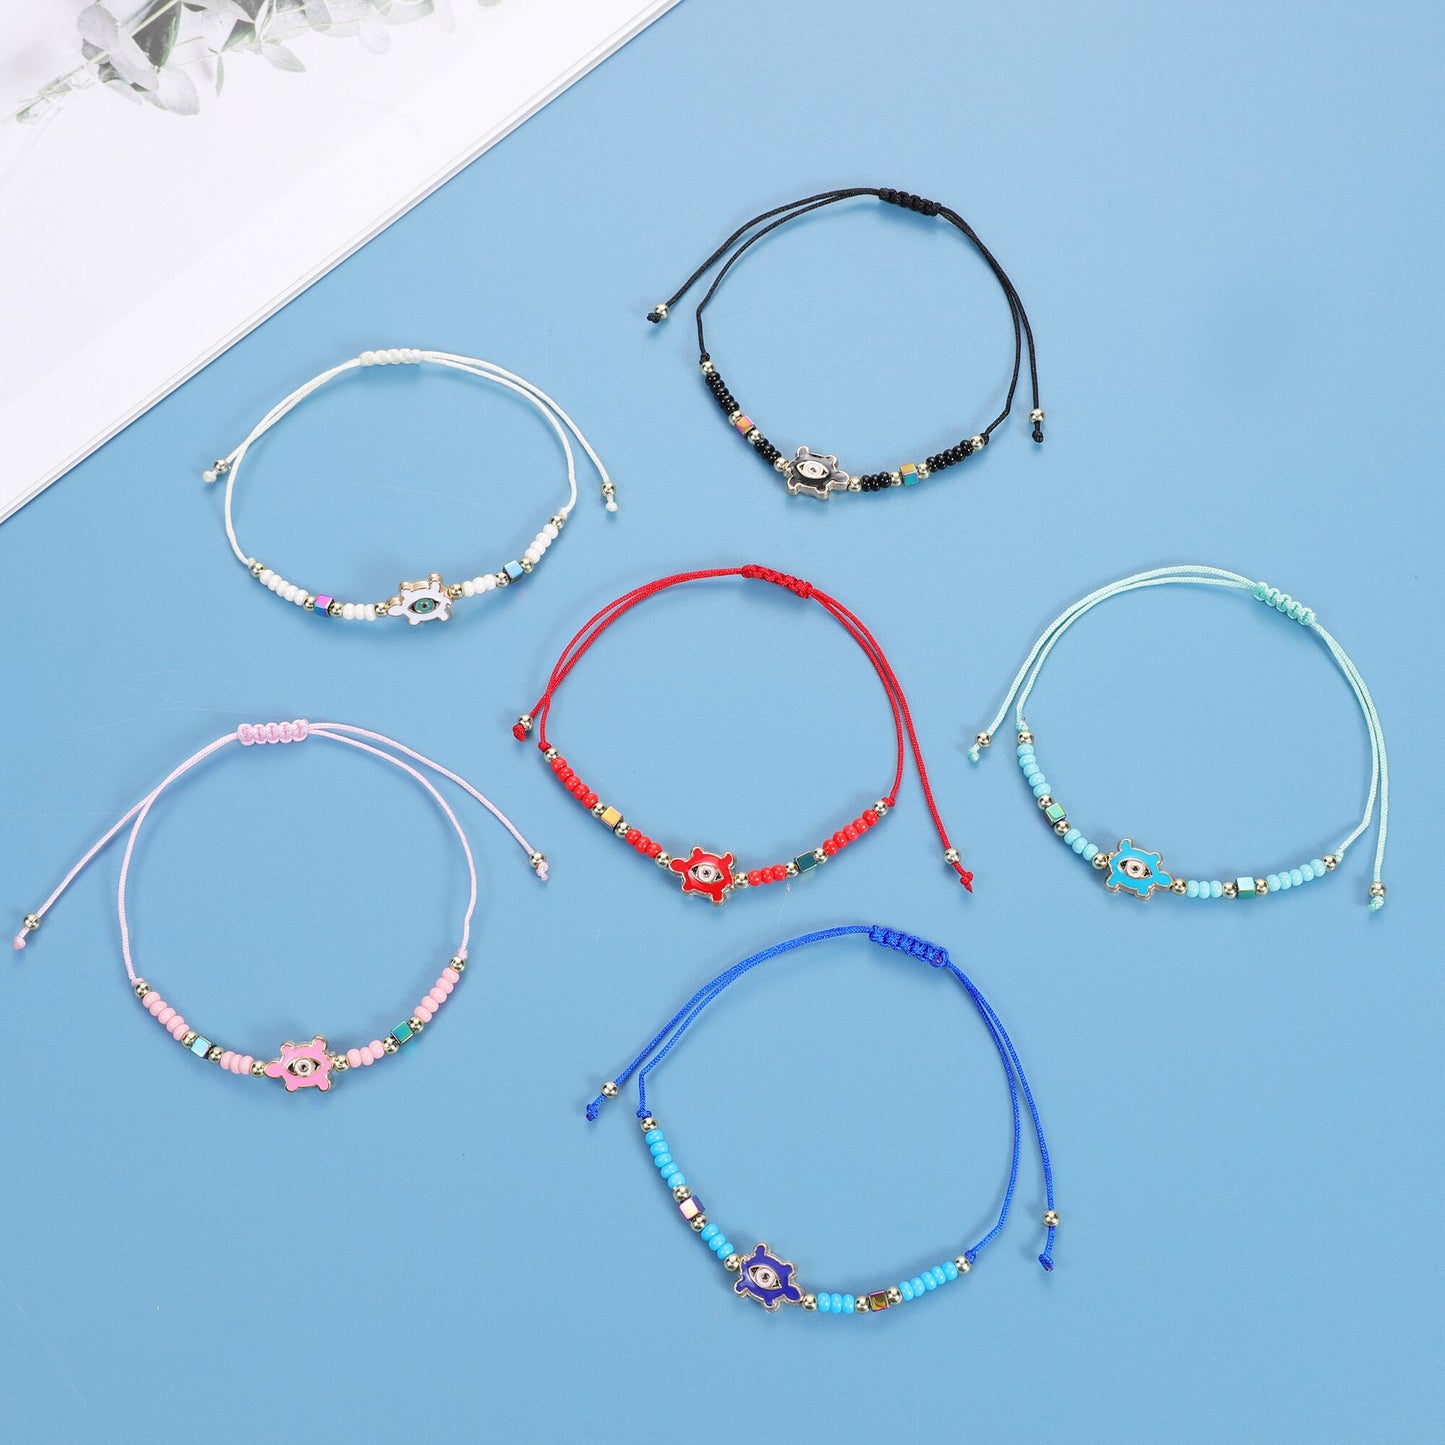 12pcs/Set Handmade Braid Rope Chain Bracelet Oil Painting Turtle Charms Seed Beads Bracelets for Women Fashion Jewelry